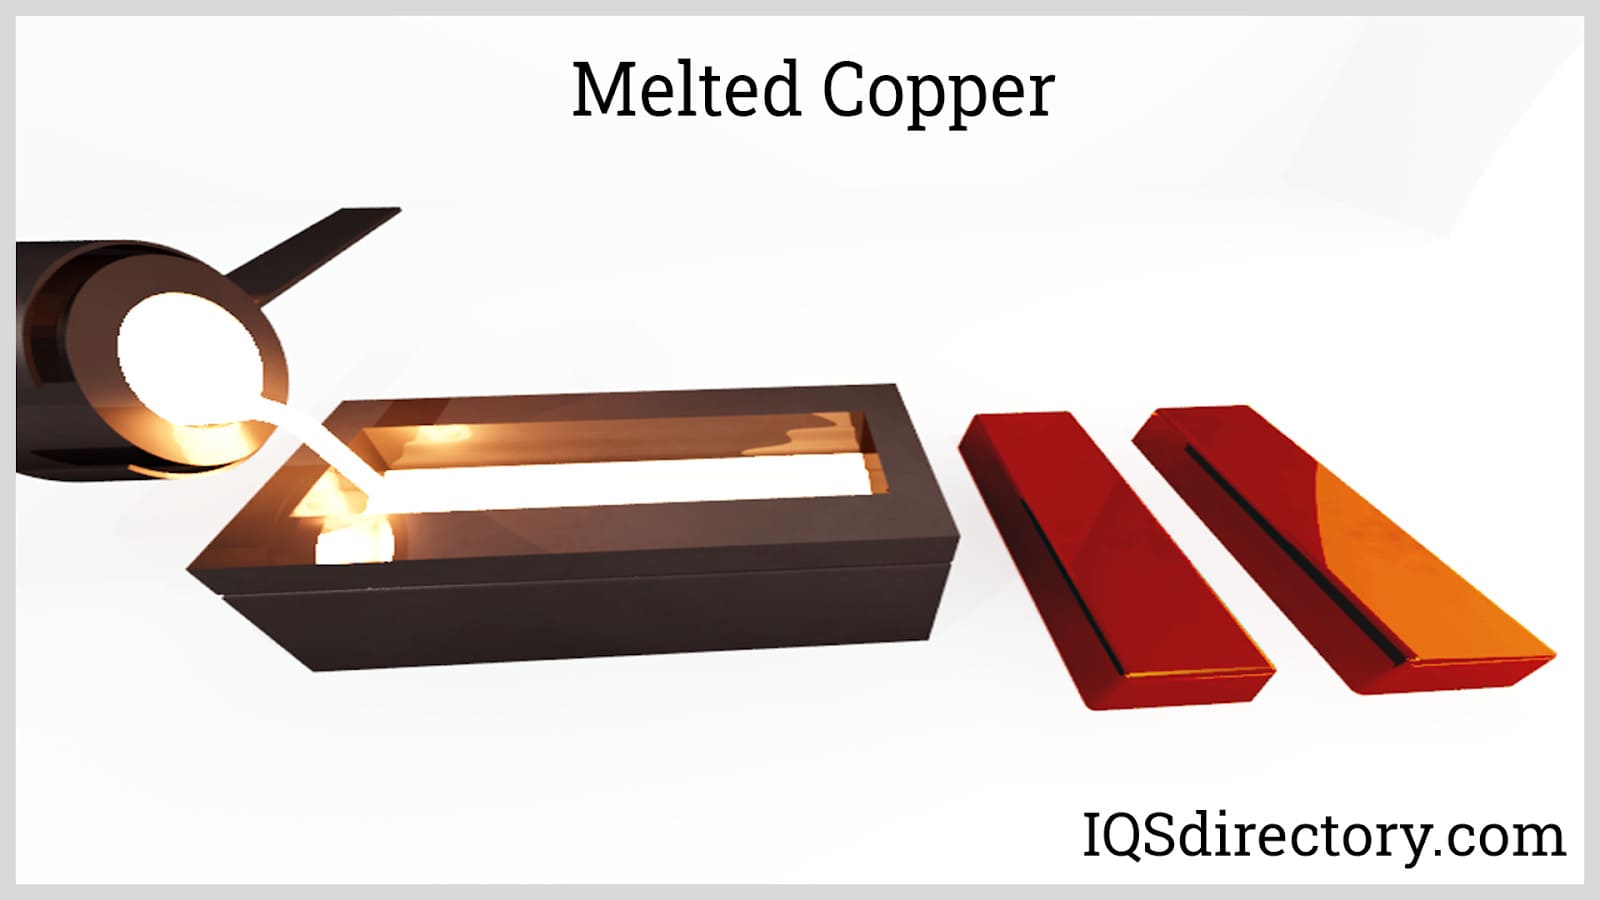 Melted Copper